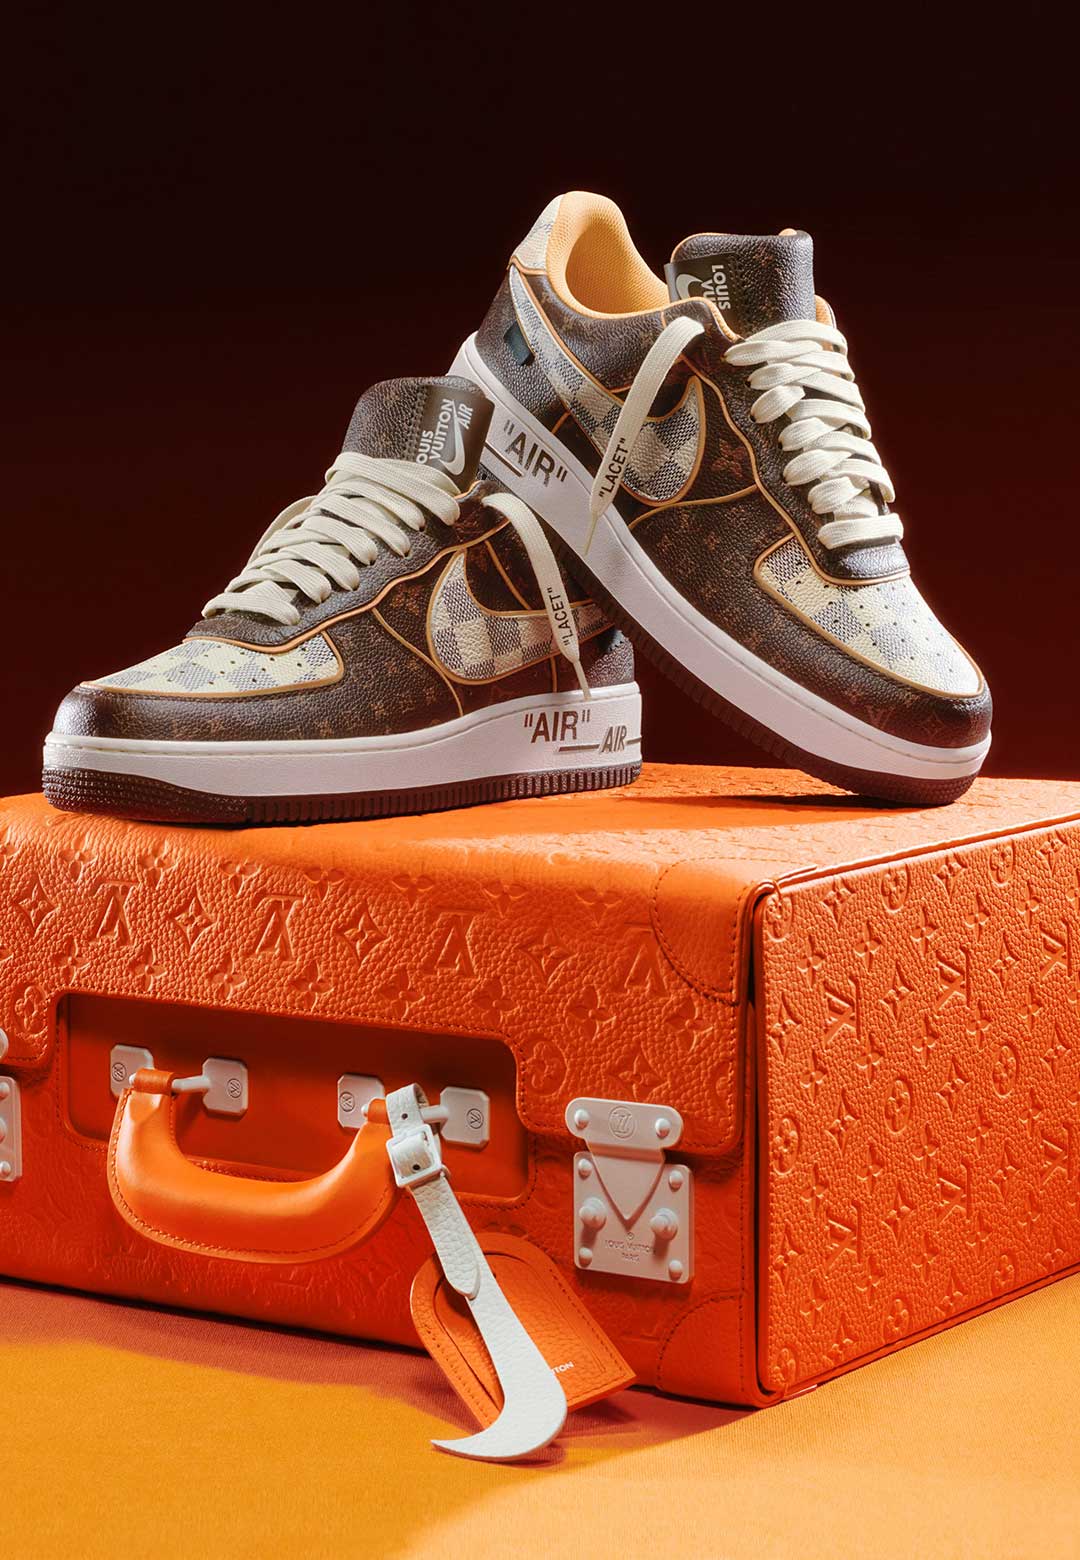 Virgil Abloh's LV x Nike sneakers fetch $25 million at Sotheby's